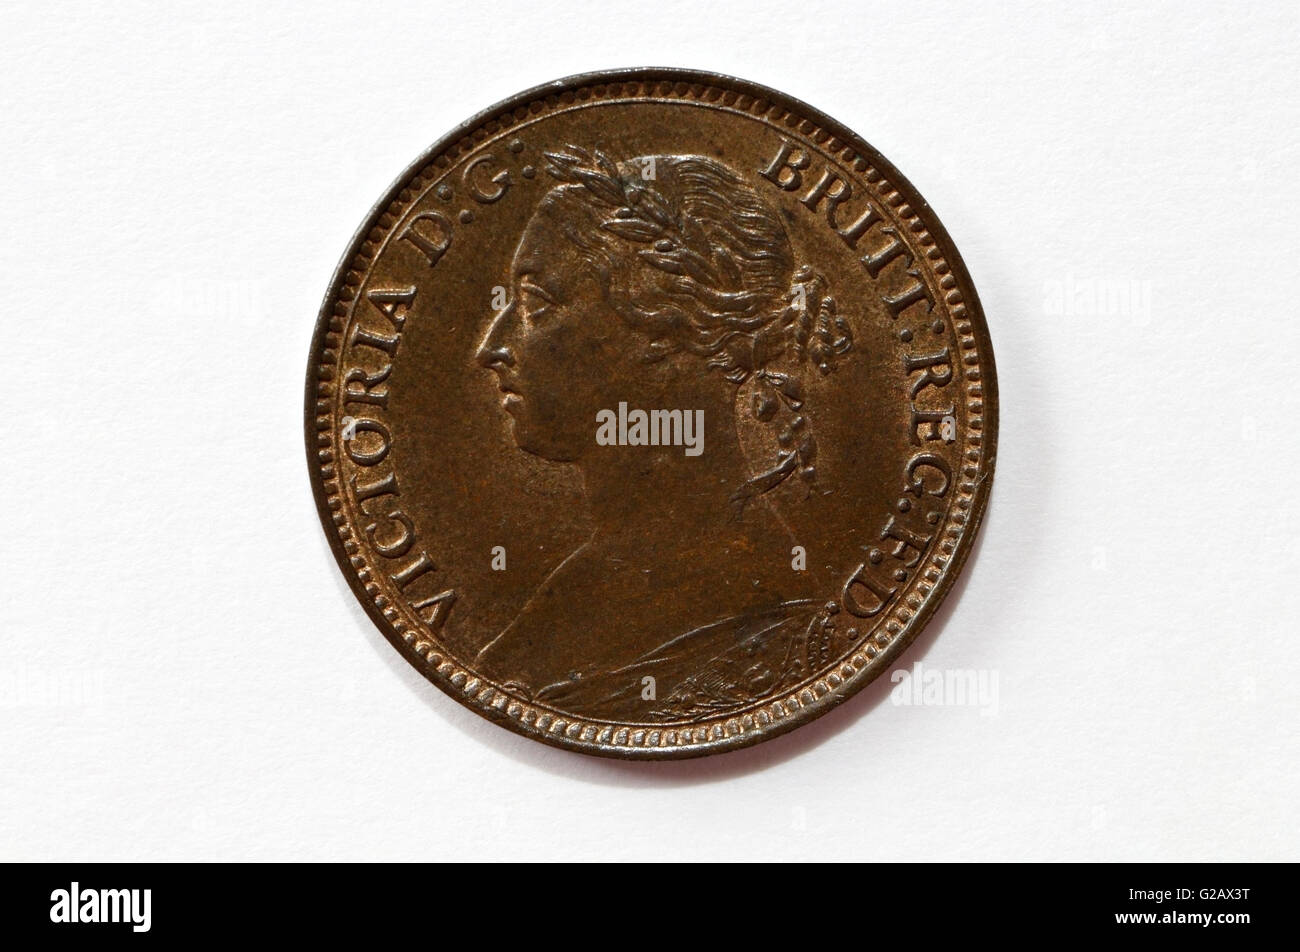 Bust Effigy of Queen Victoria on a British Farthing coin dated 1886 Stock Photo